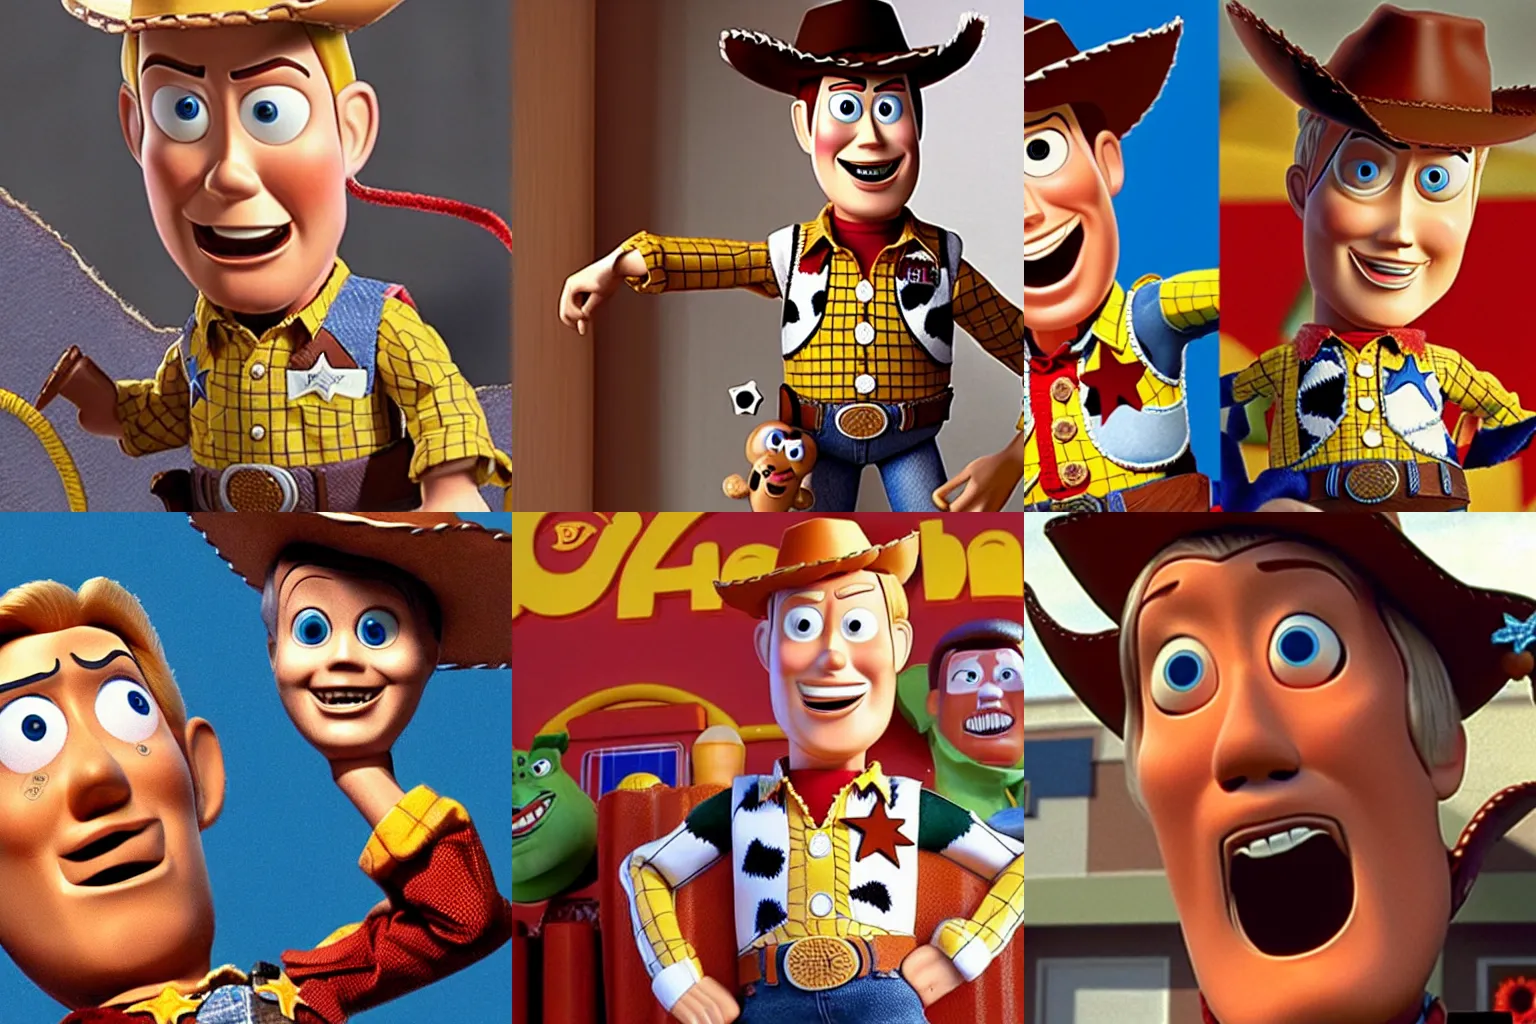 Prompt: Gary Busey as woody from toy story